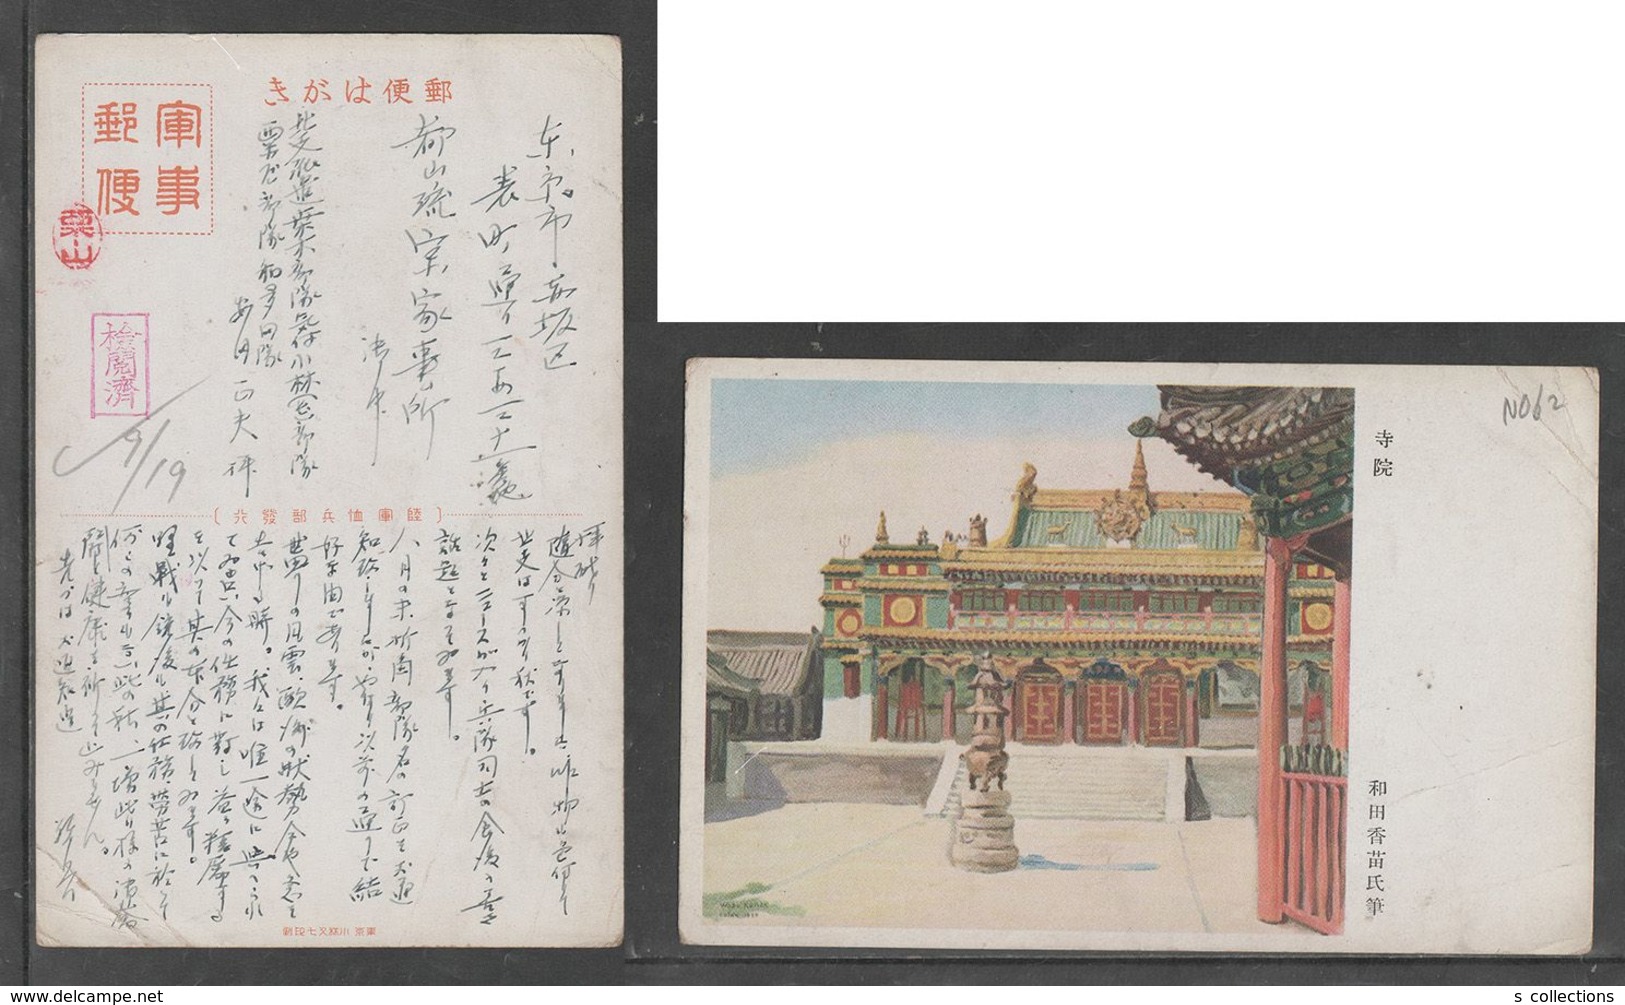 JAPAN WWII Military Temple Picture Postcard NORTH CHINA WW2 MANCHURIA CHINE MANDCHOUKOUO JAPON GIAPPONE - 1941-45 Cina Del Nord